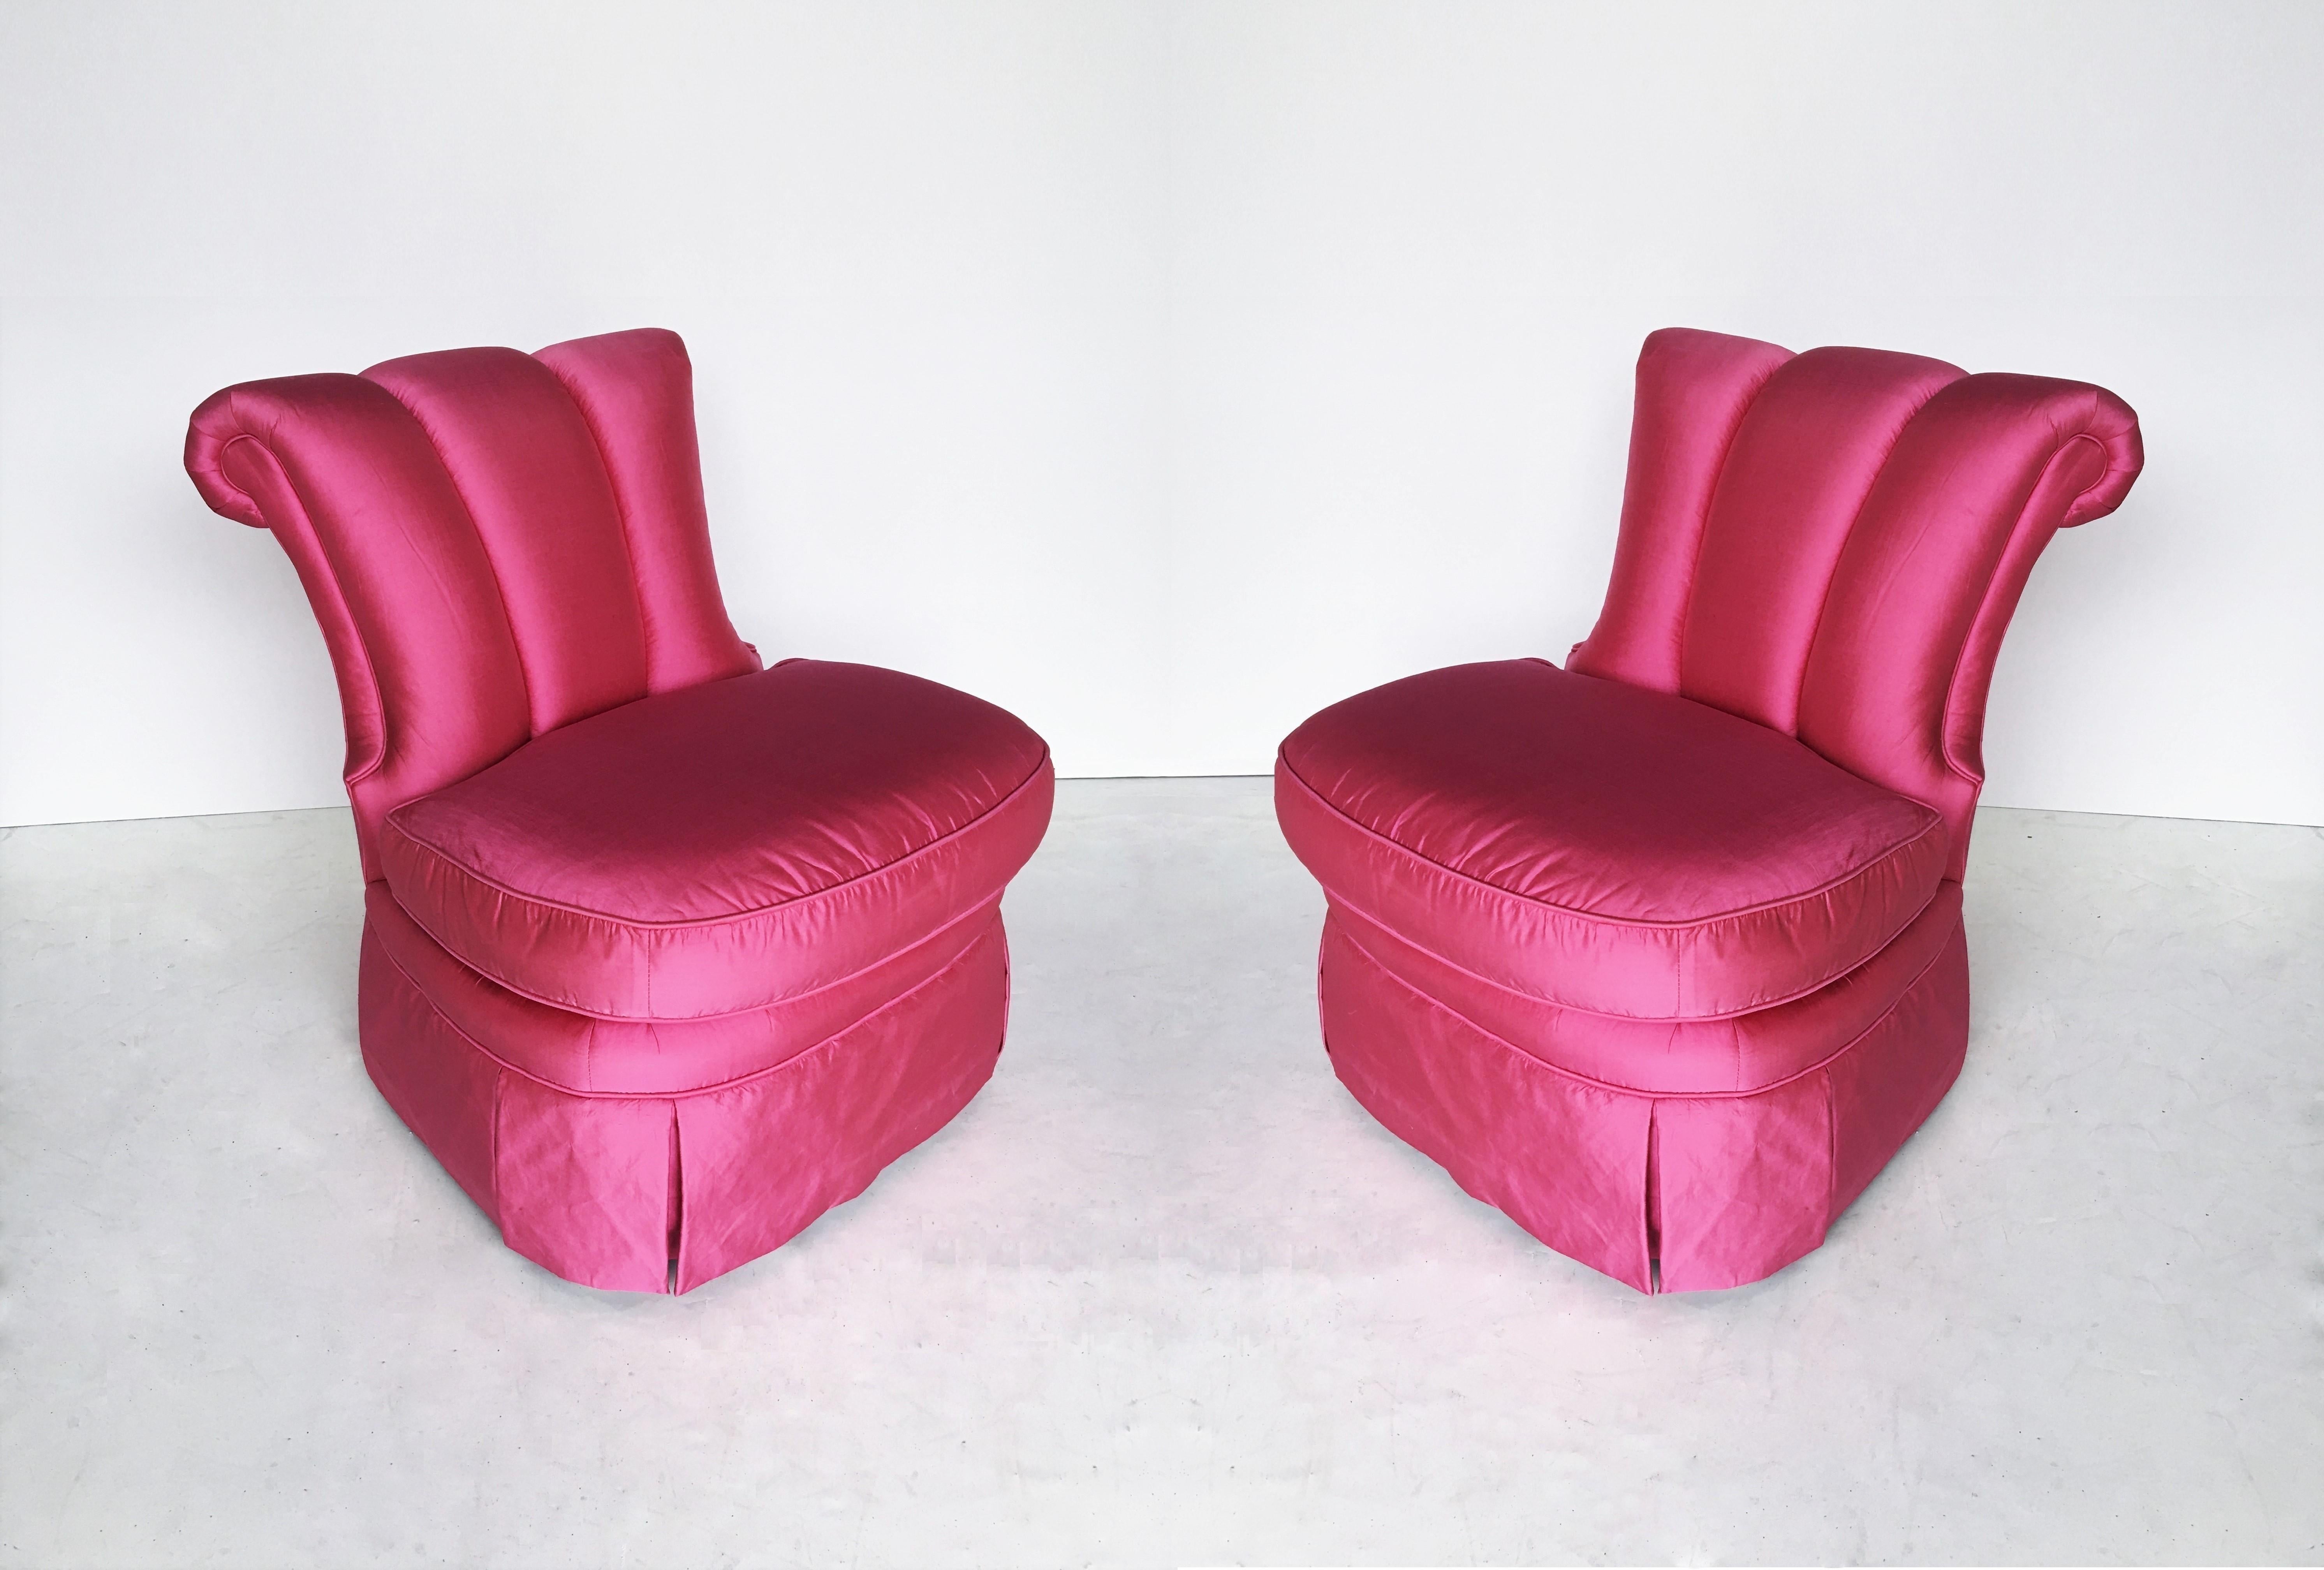 An elegant pair of Regency inspired form slipper chairs. Each chair features channeled back and out scrolled crest rail; the loose seat cushion upholstered in pink silk fabric. They stand on legs covered by a pleated skirt. These are in wonderful